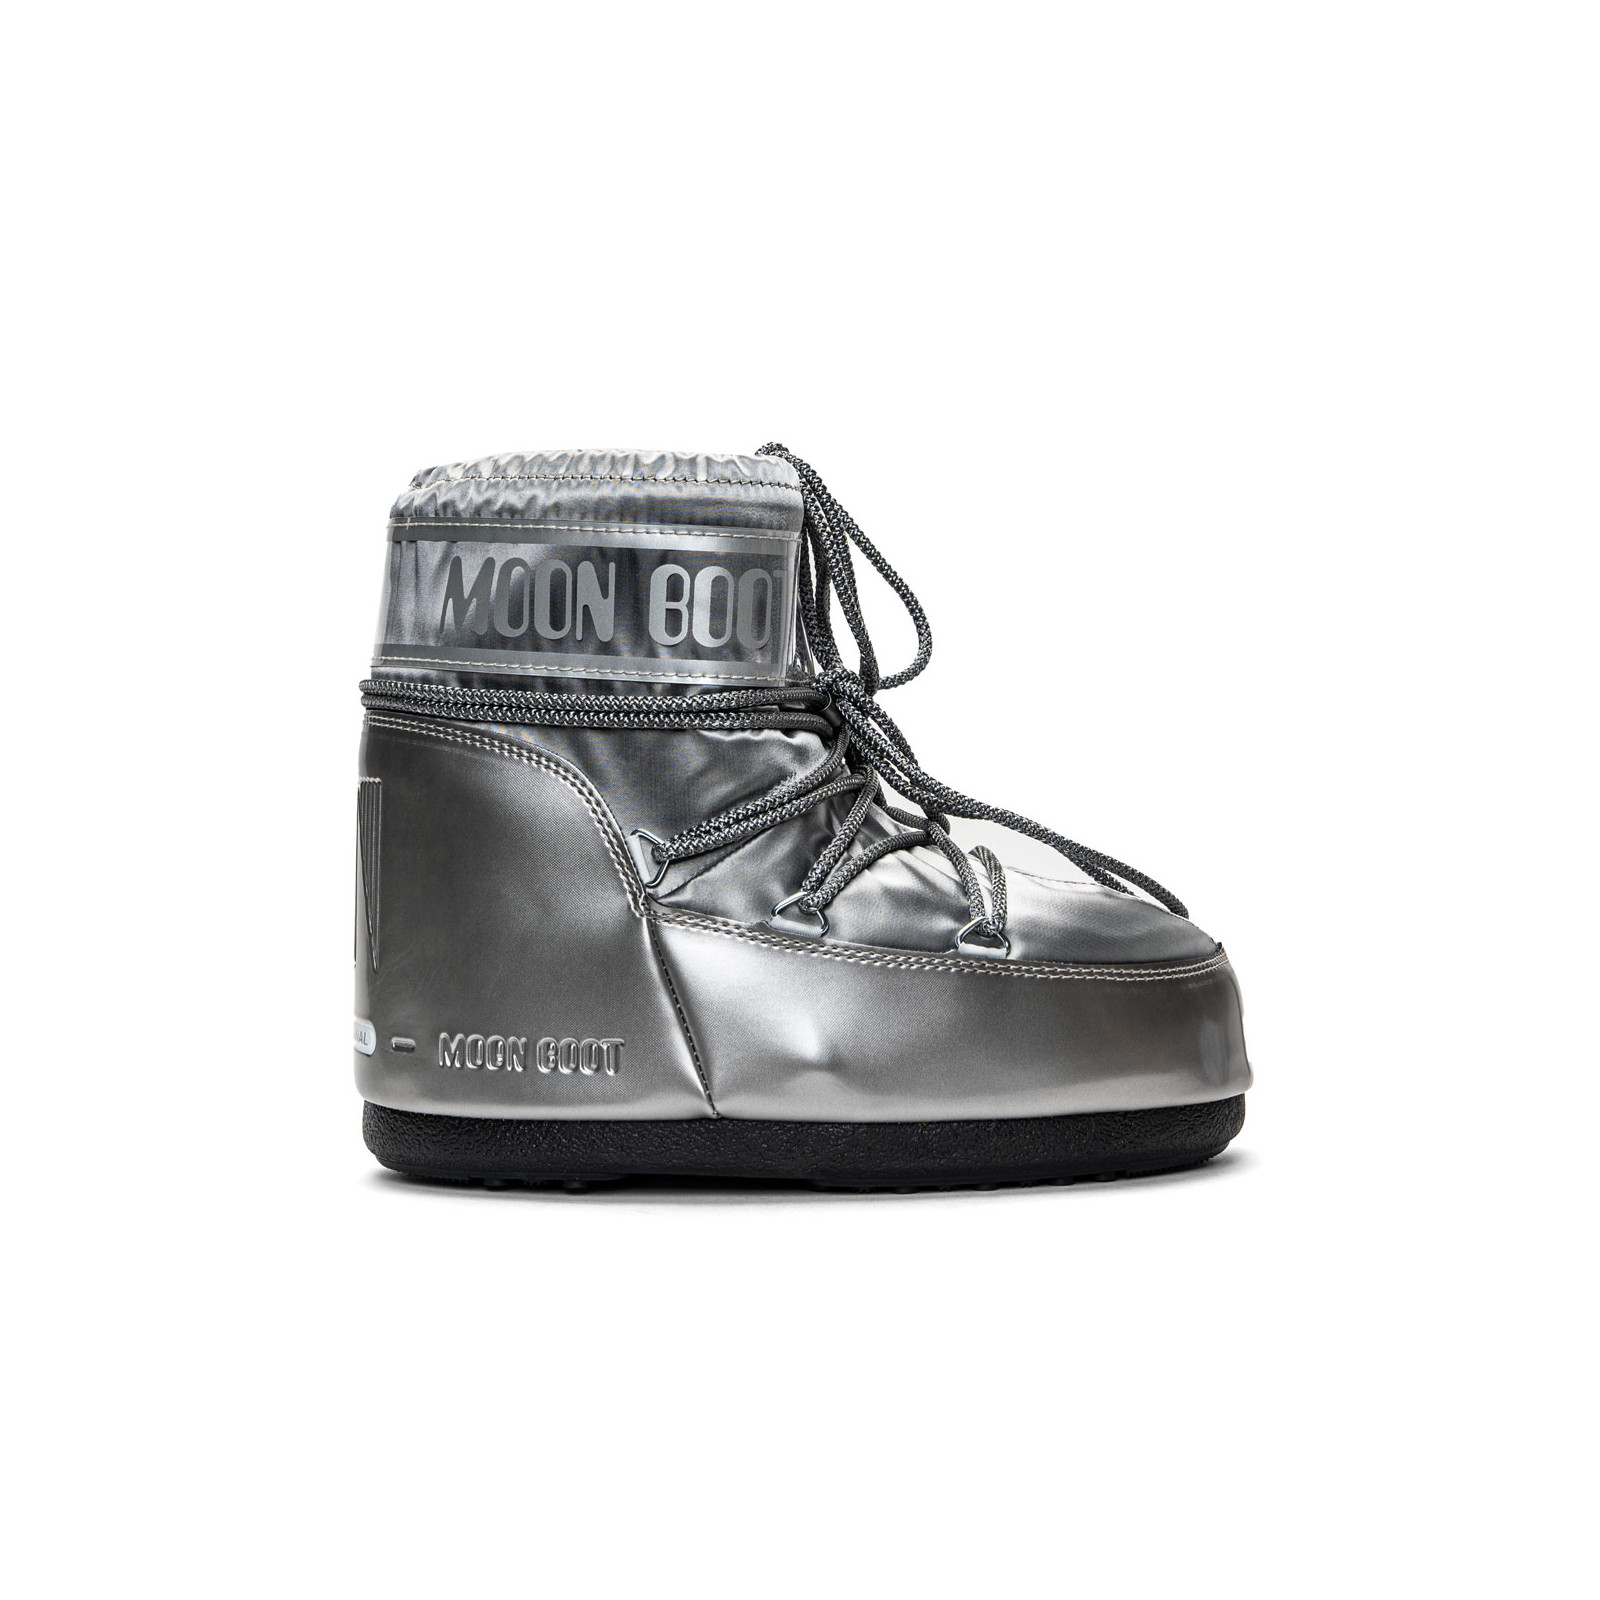 MOON BOOT ICON LOW GLANCE SILVER